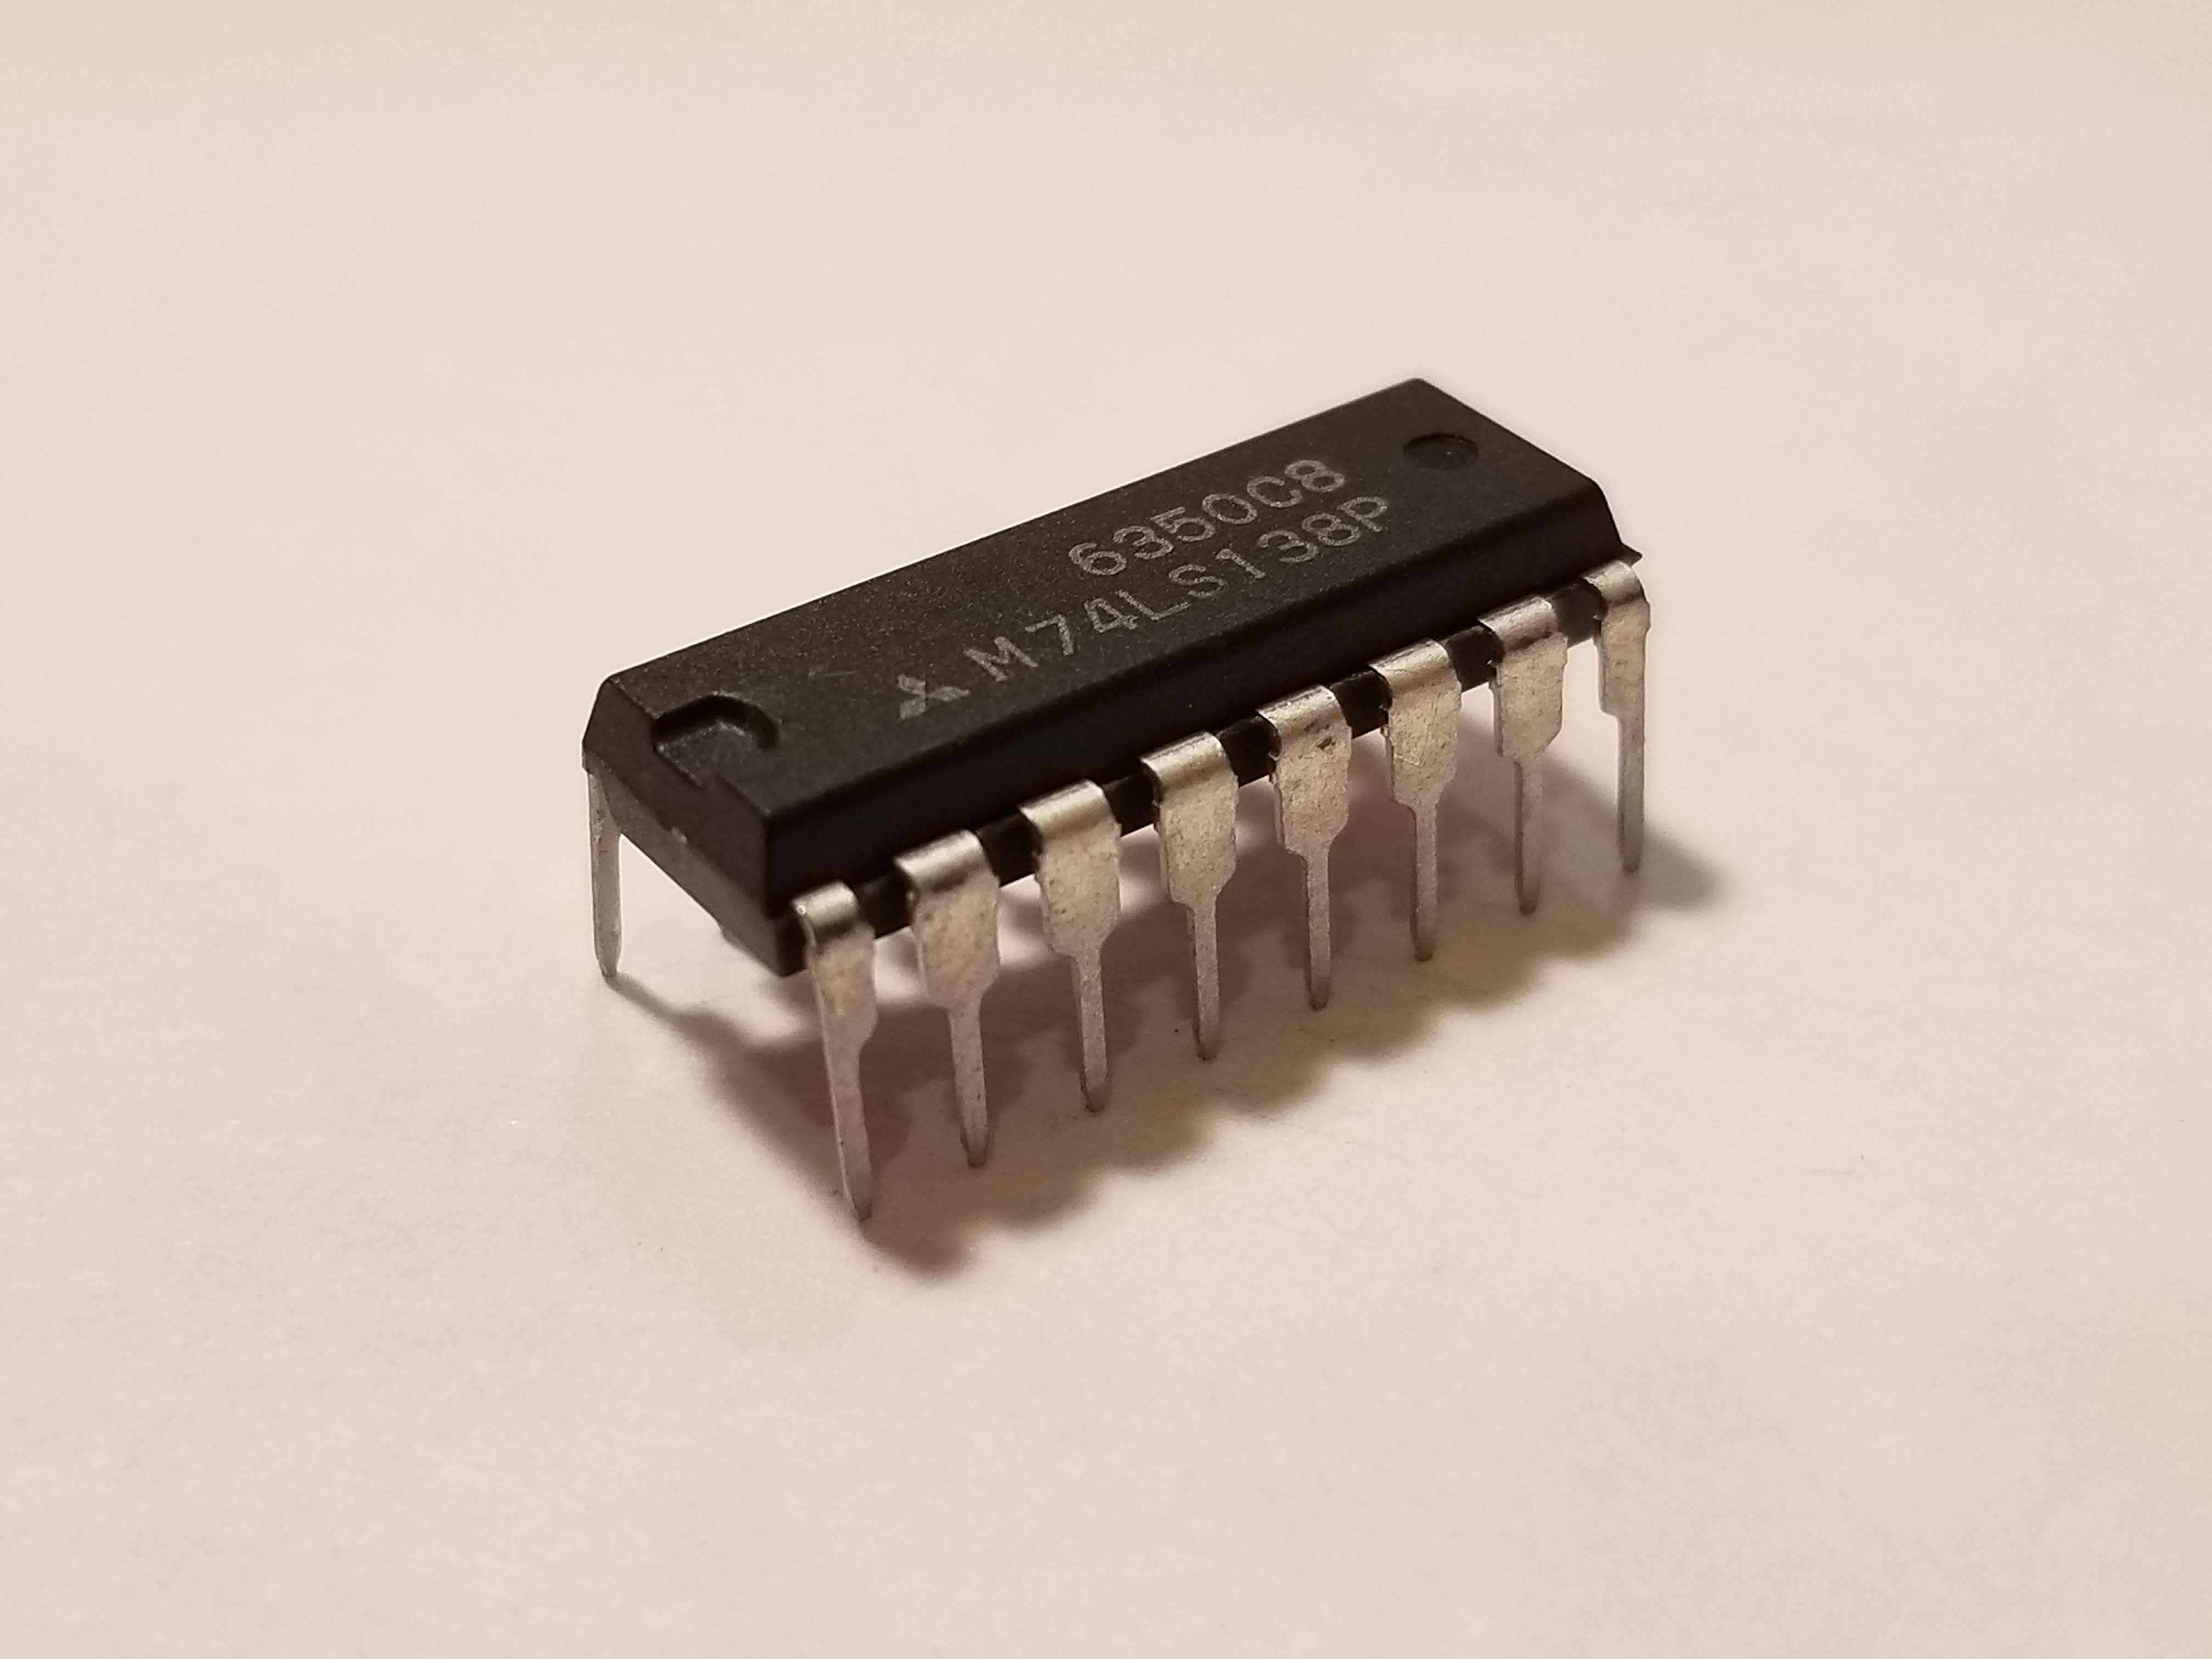 Picture of 74138 3-to-8 Decoder